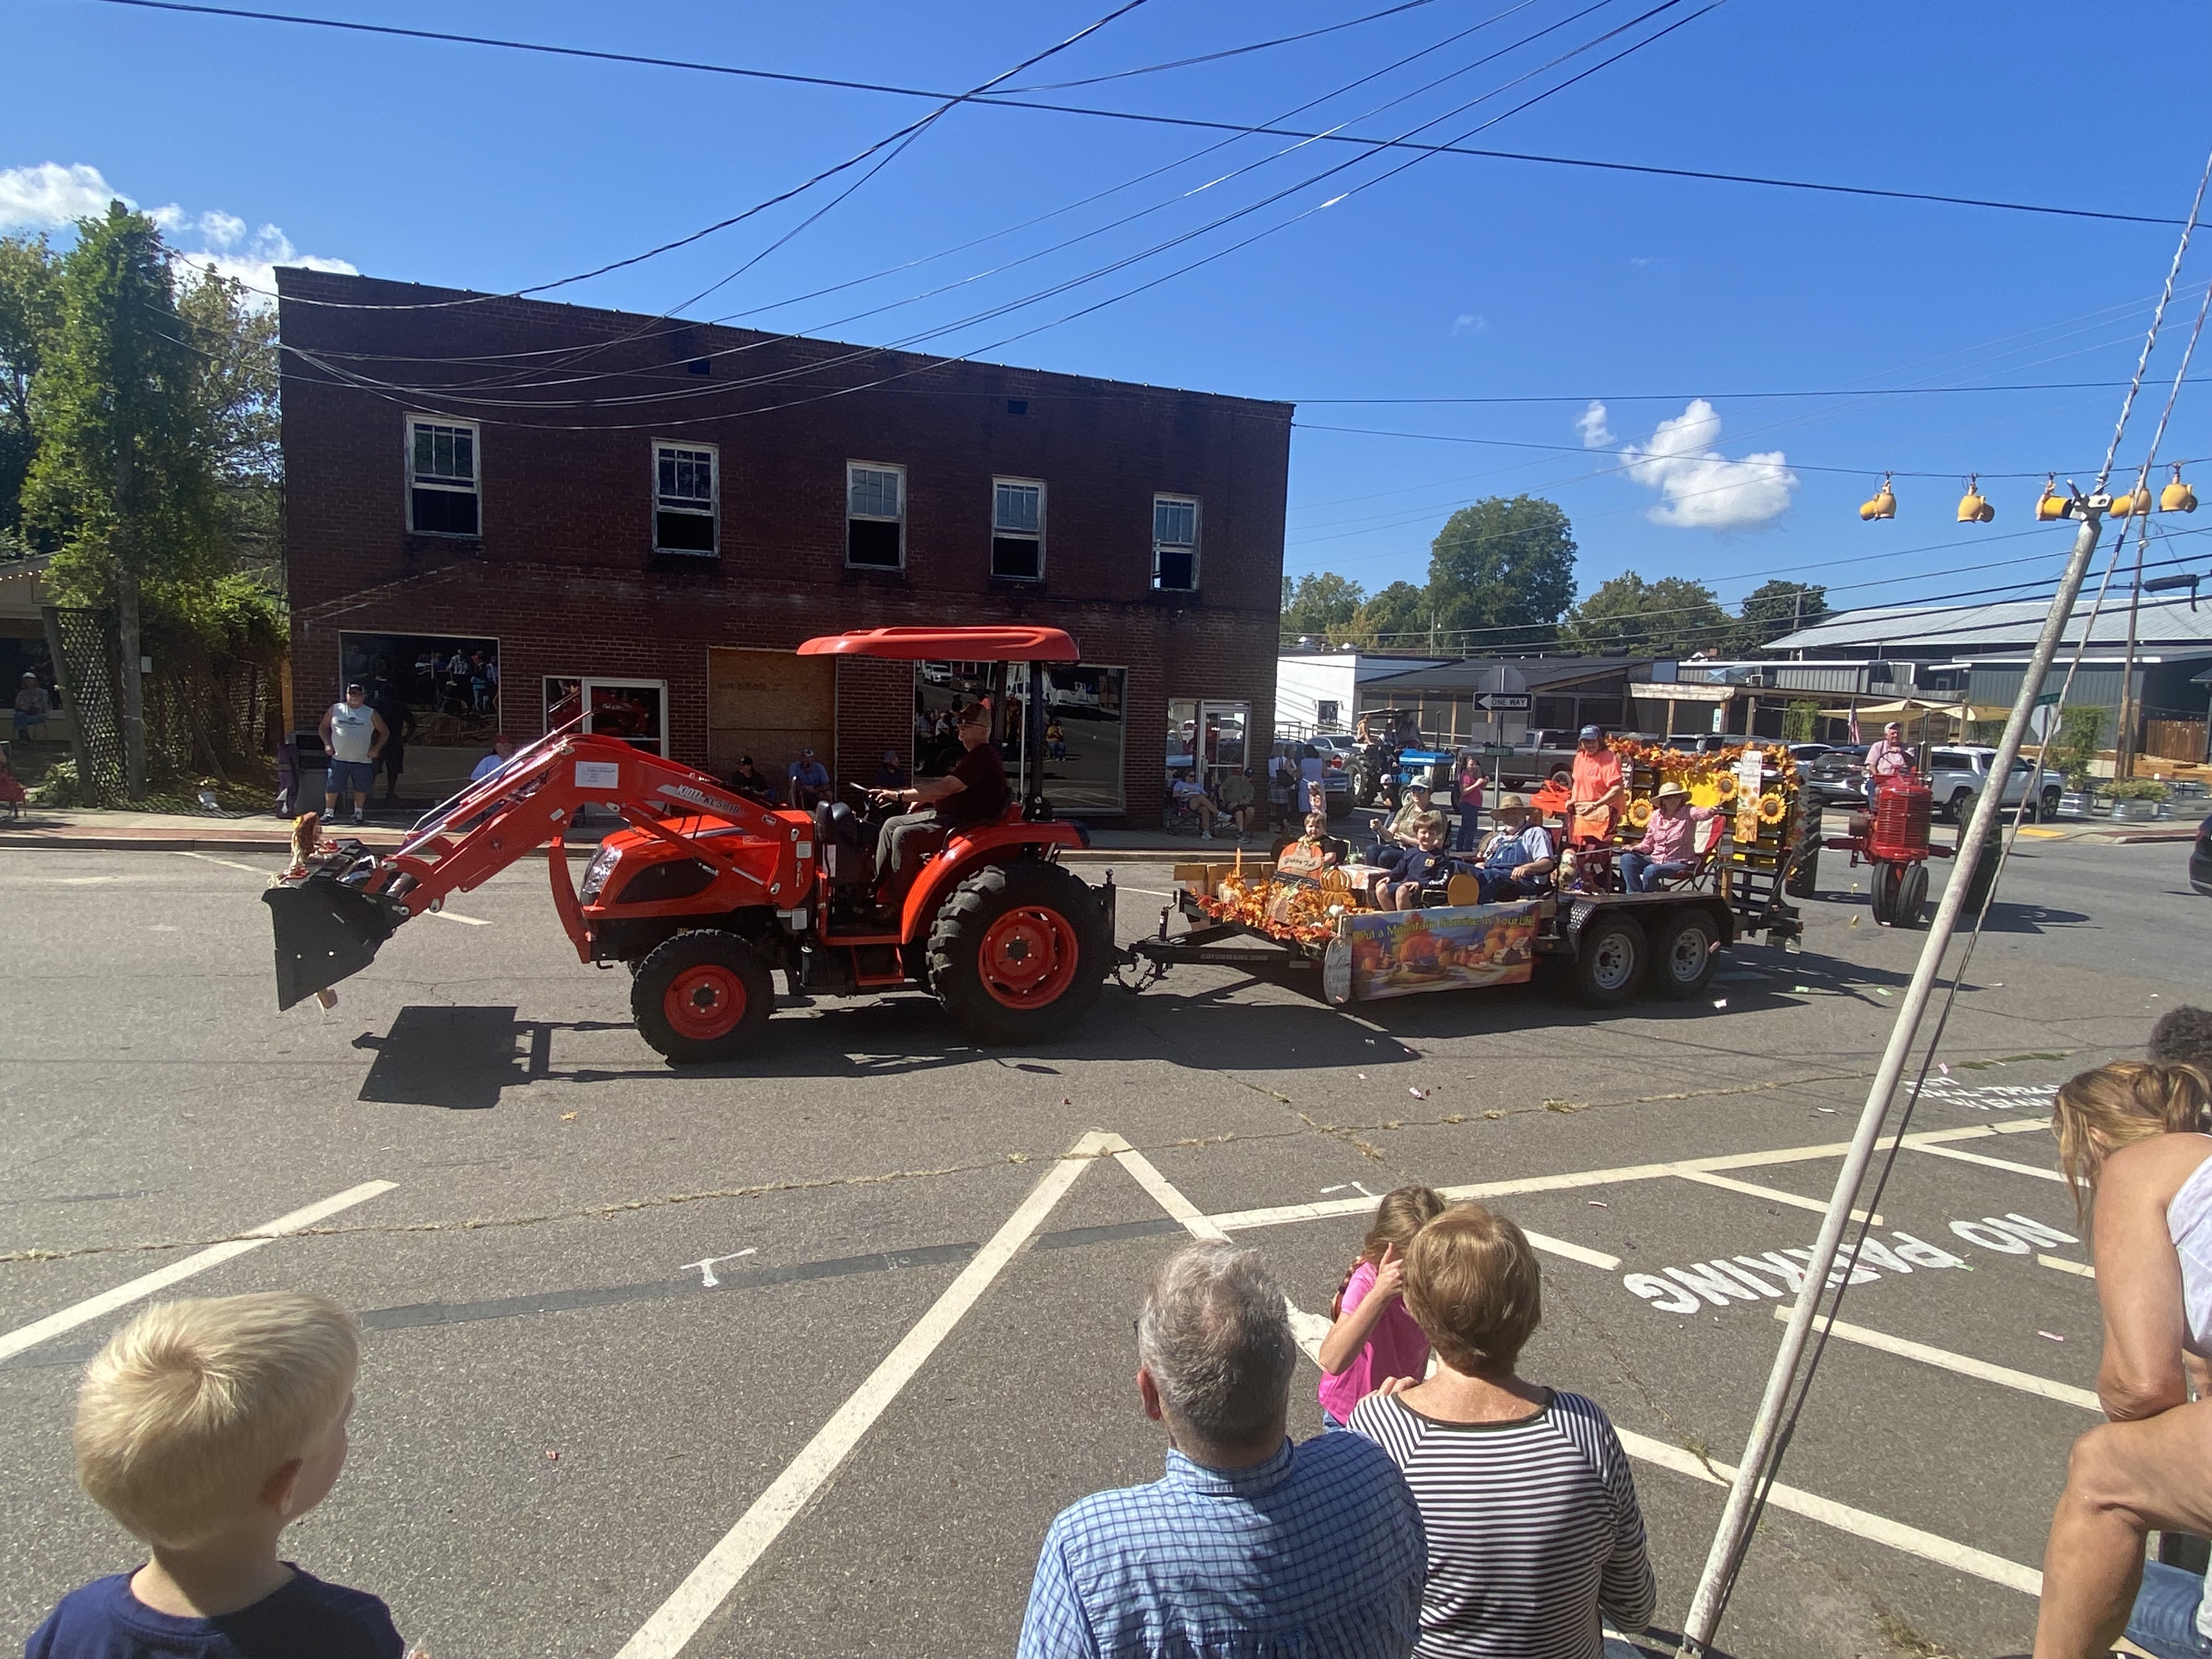 tractor pulling trailer with people in parade